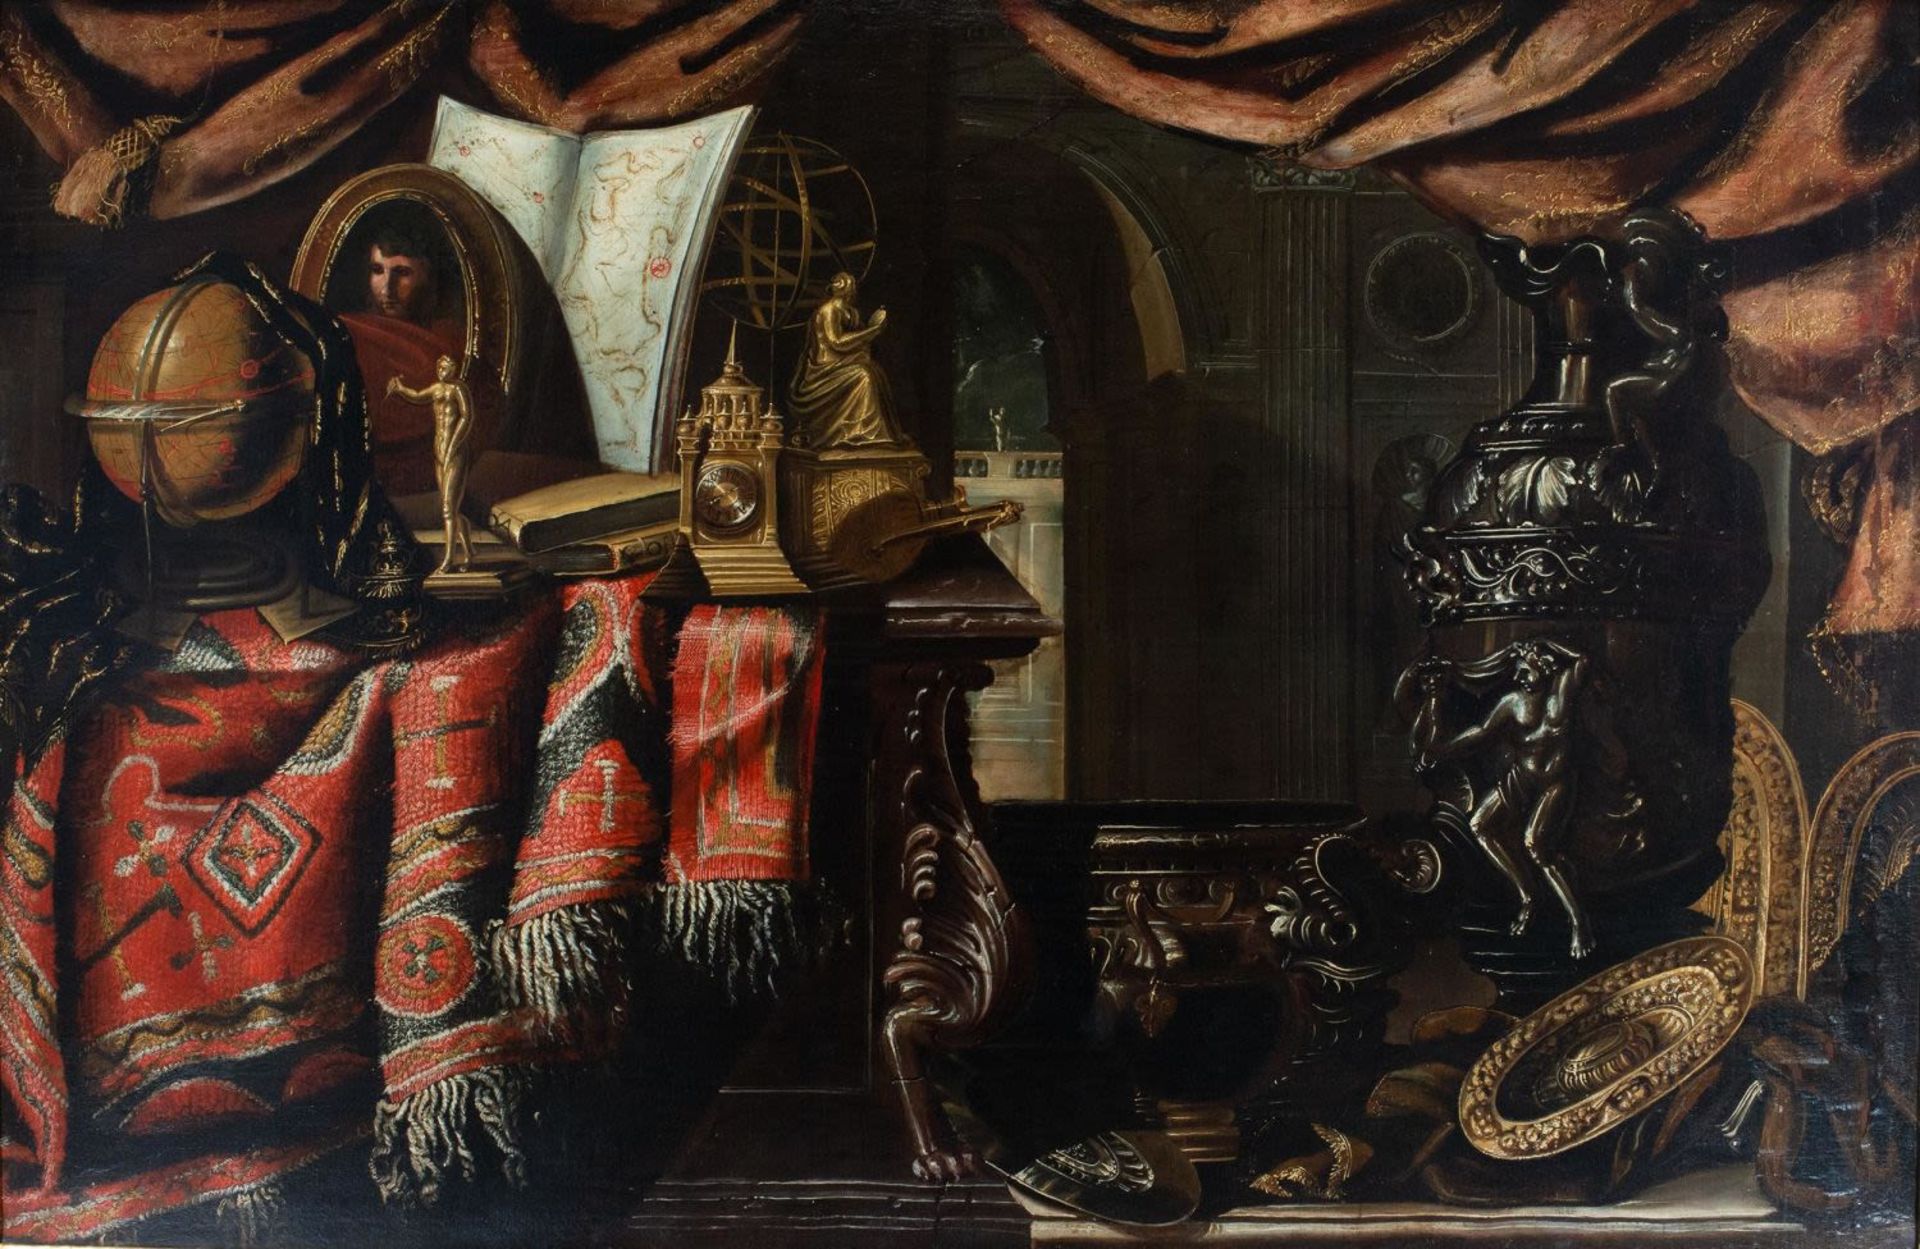 FRANCESCO NOLETTI, CALLED IL MALTESE (VALLETTA C. 1611 - ROME, 1654), LARGE PAIR OF STILL LIFES WITH - Image 6 of 21